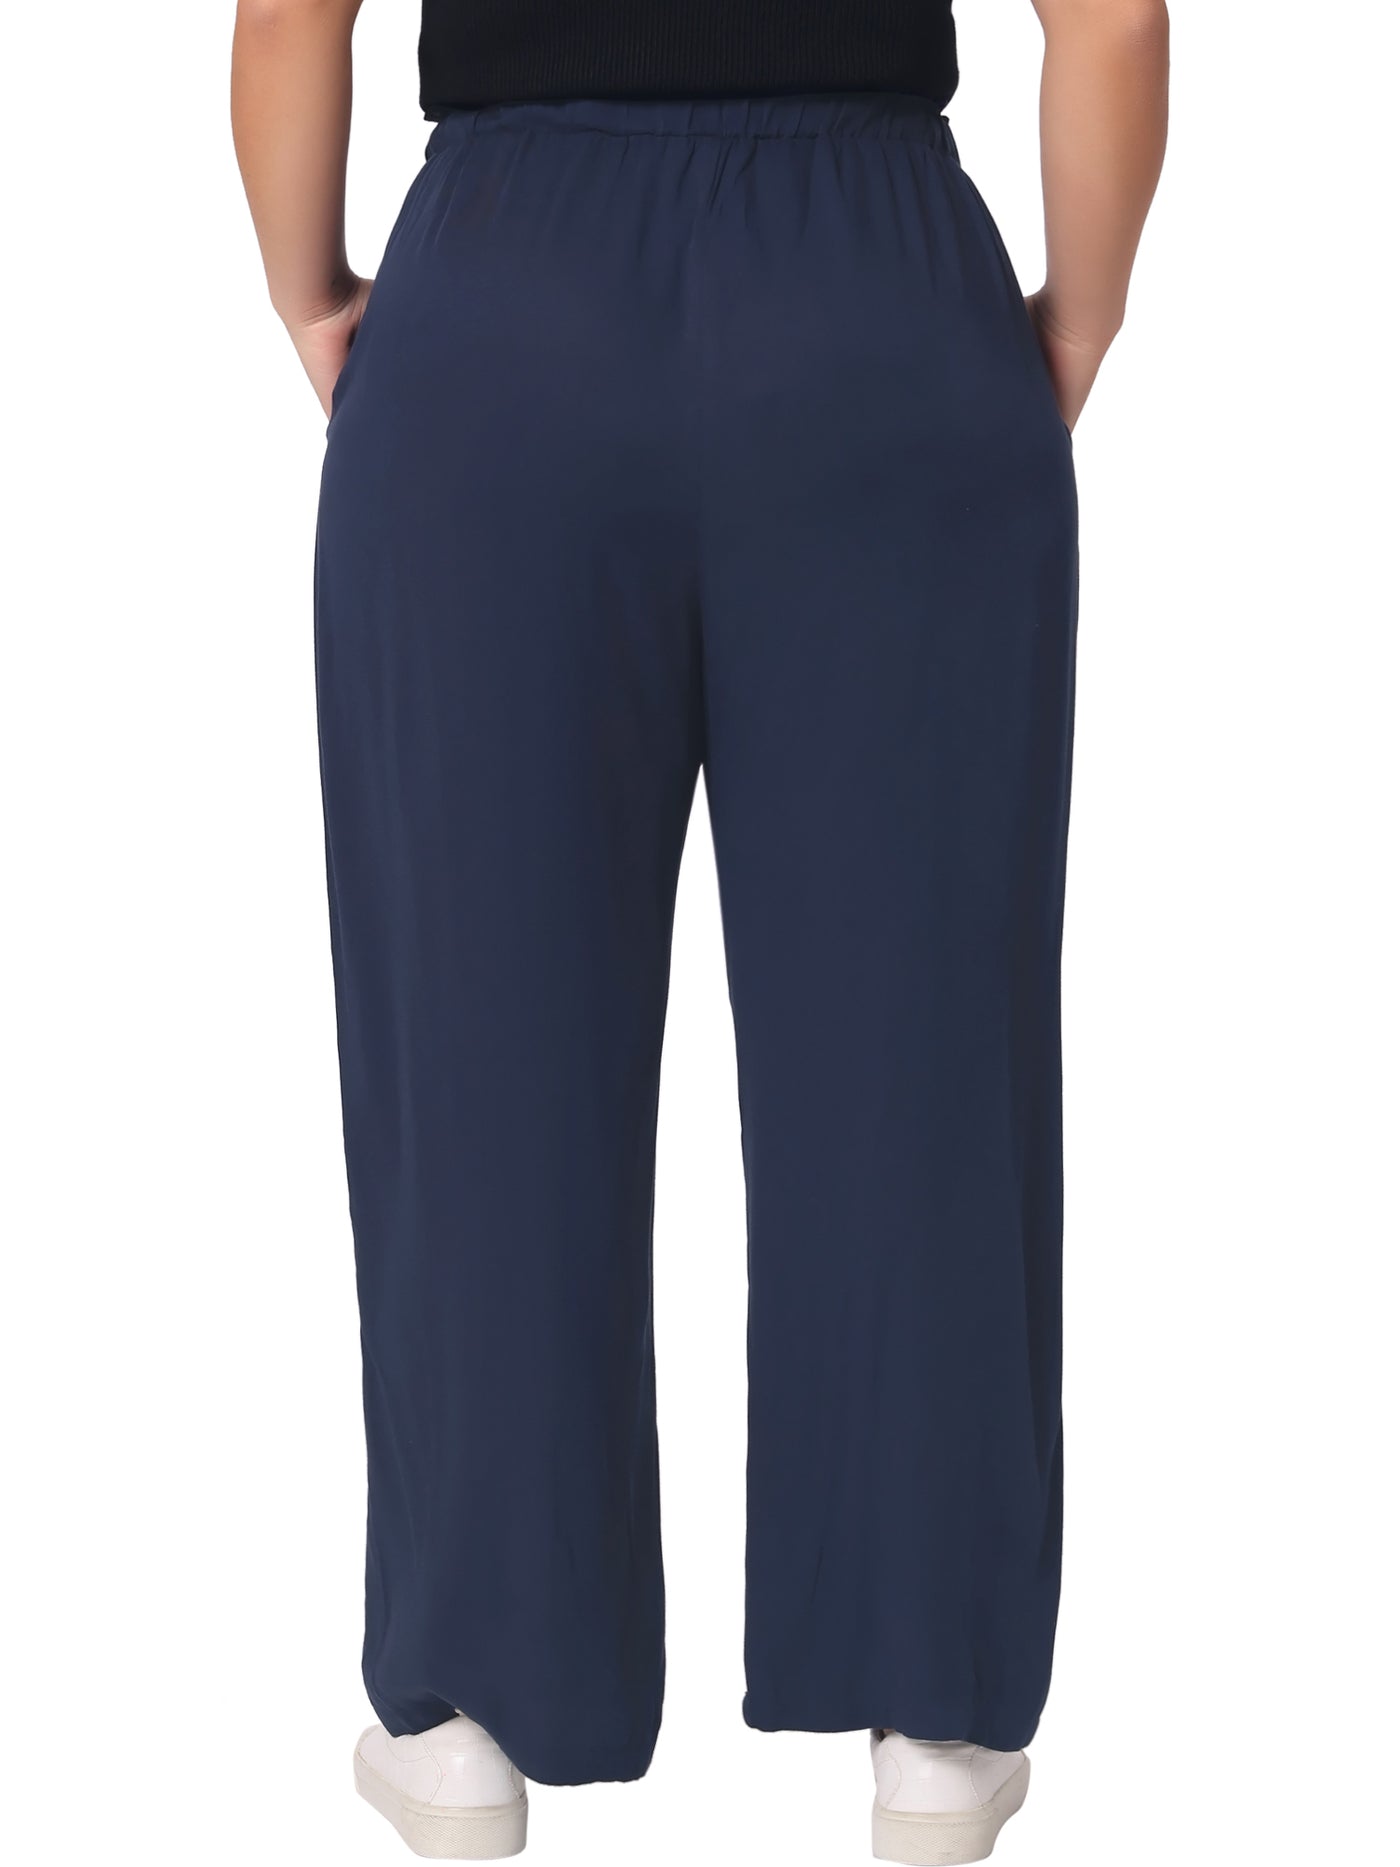 Bublédon Plus Size Palazzo Stretchy High Waisted with Pocket Wide Leg Pants